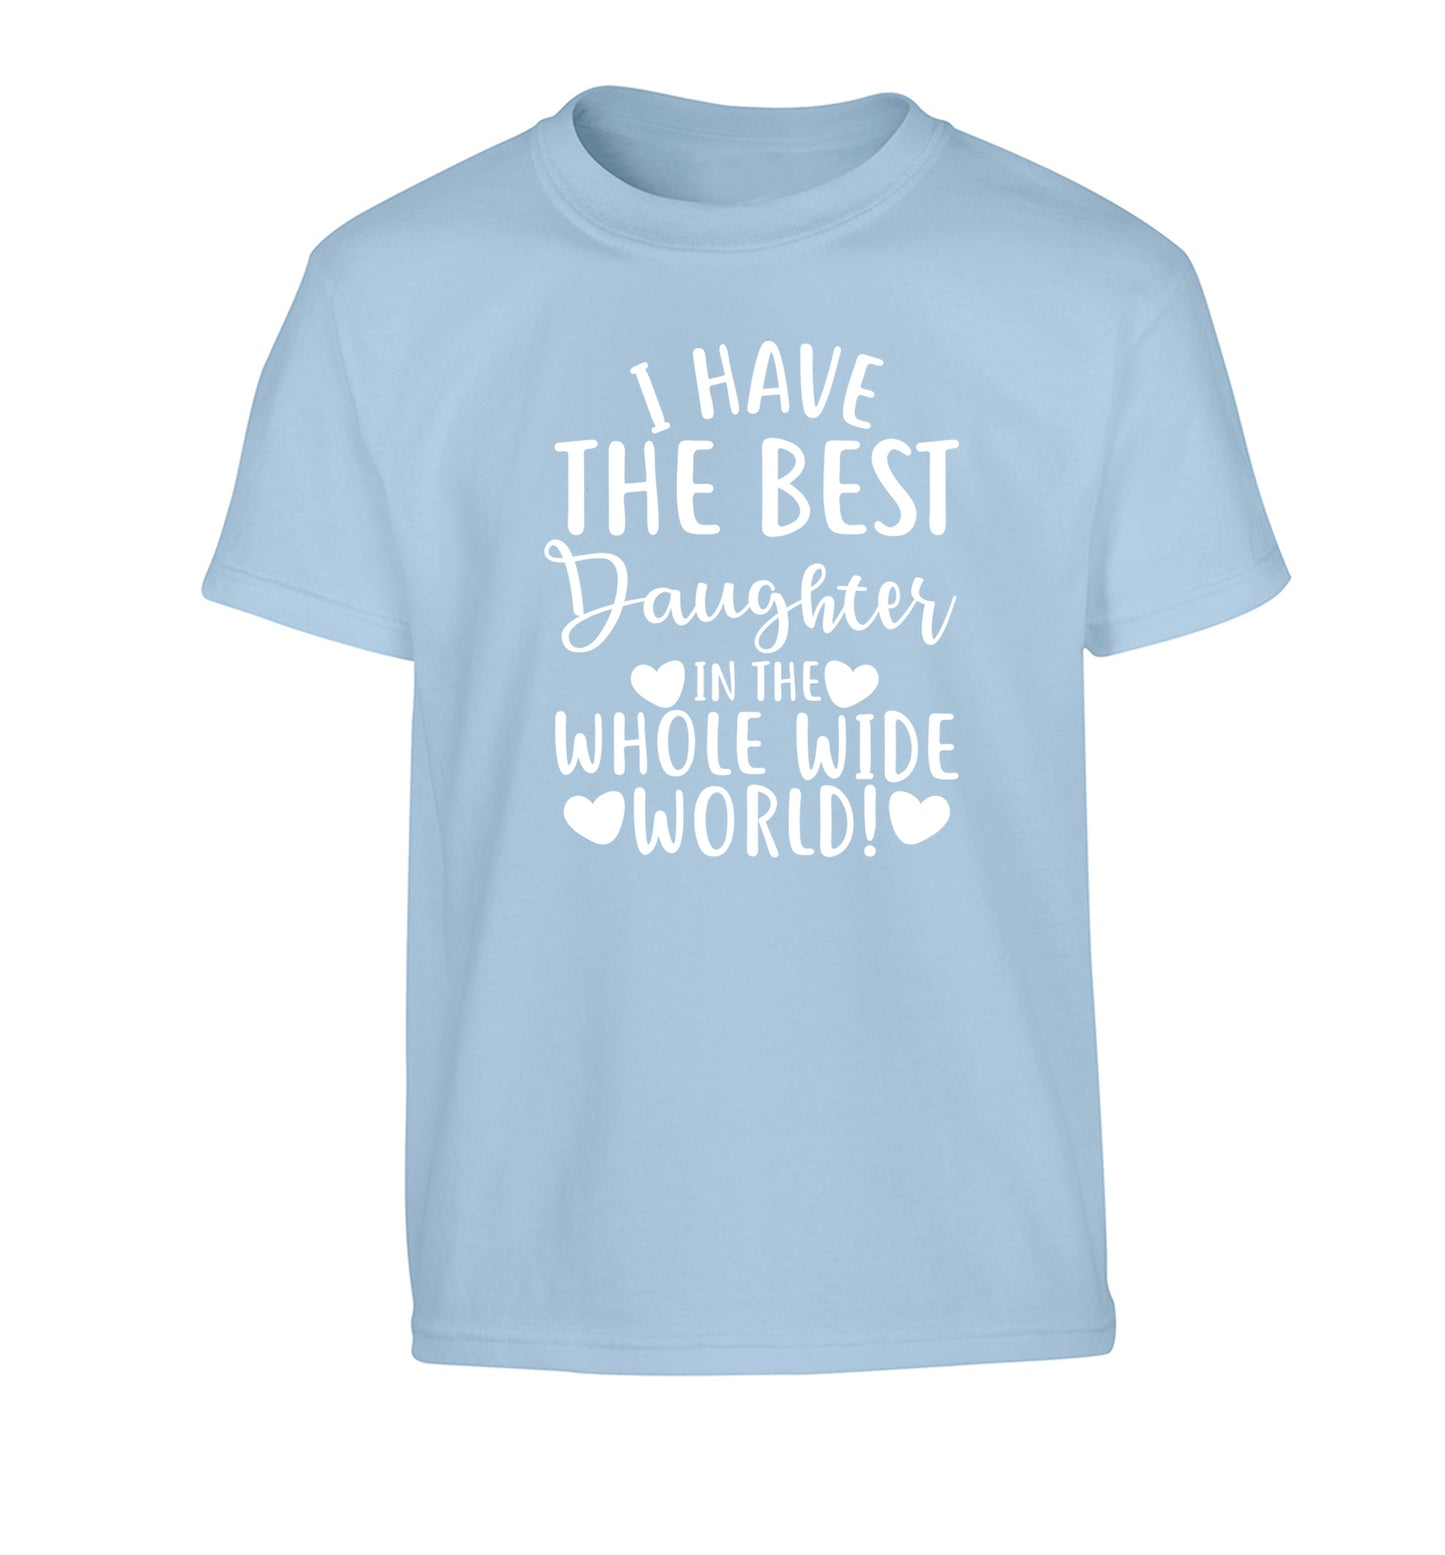 I have the best daughter in the whole wide world! Children's light blue Tshirt 12-13 Years